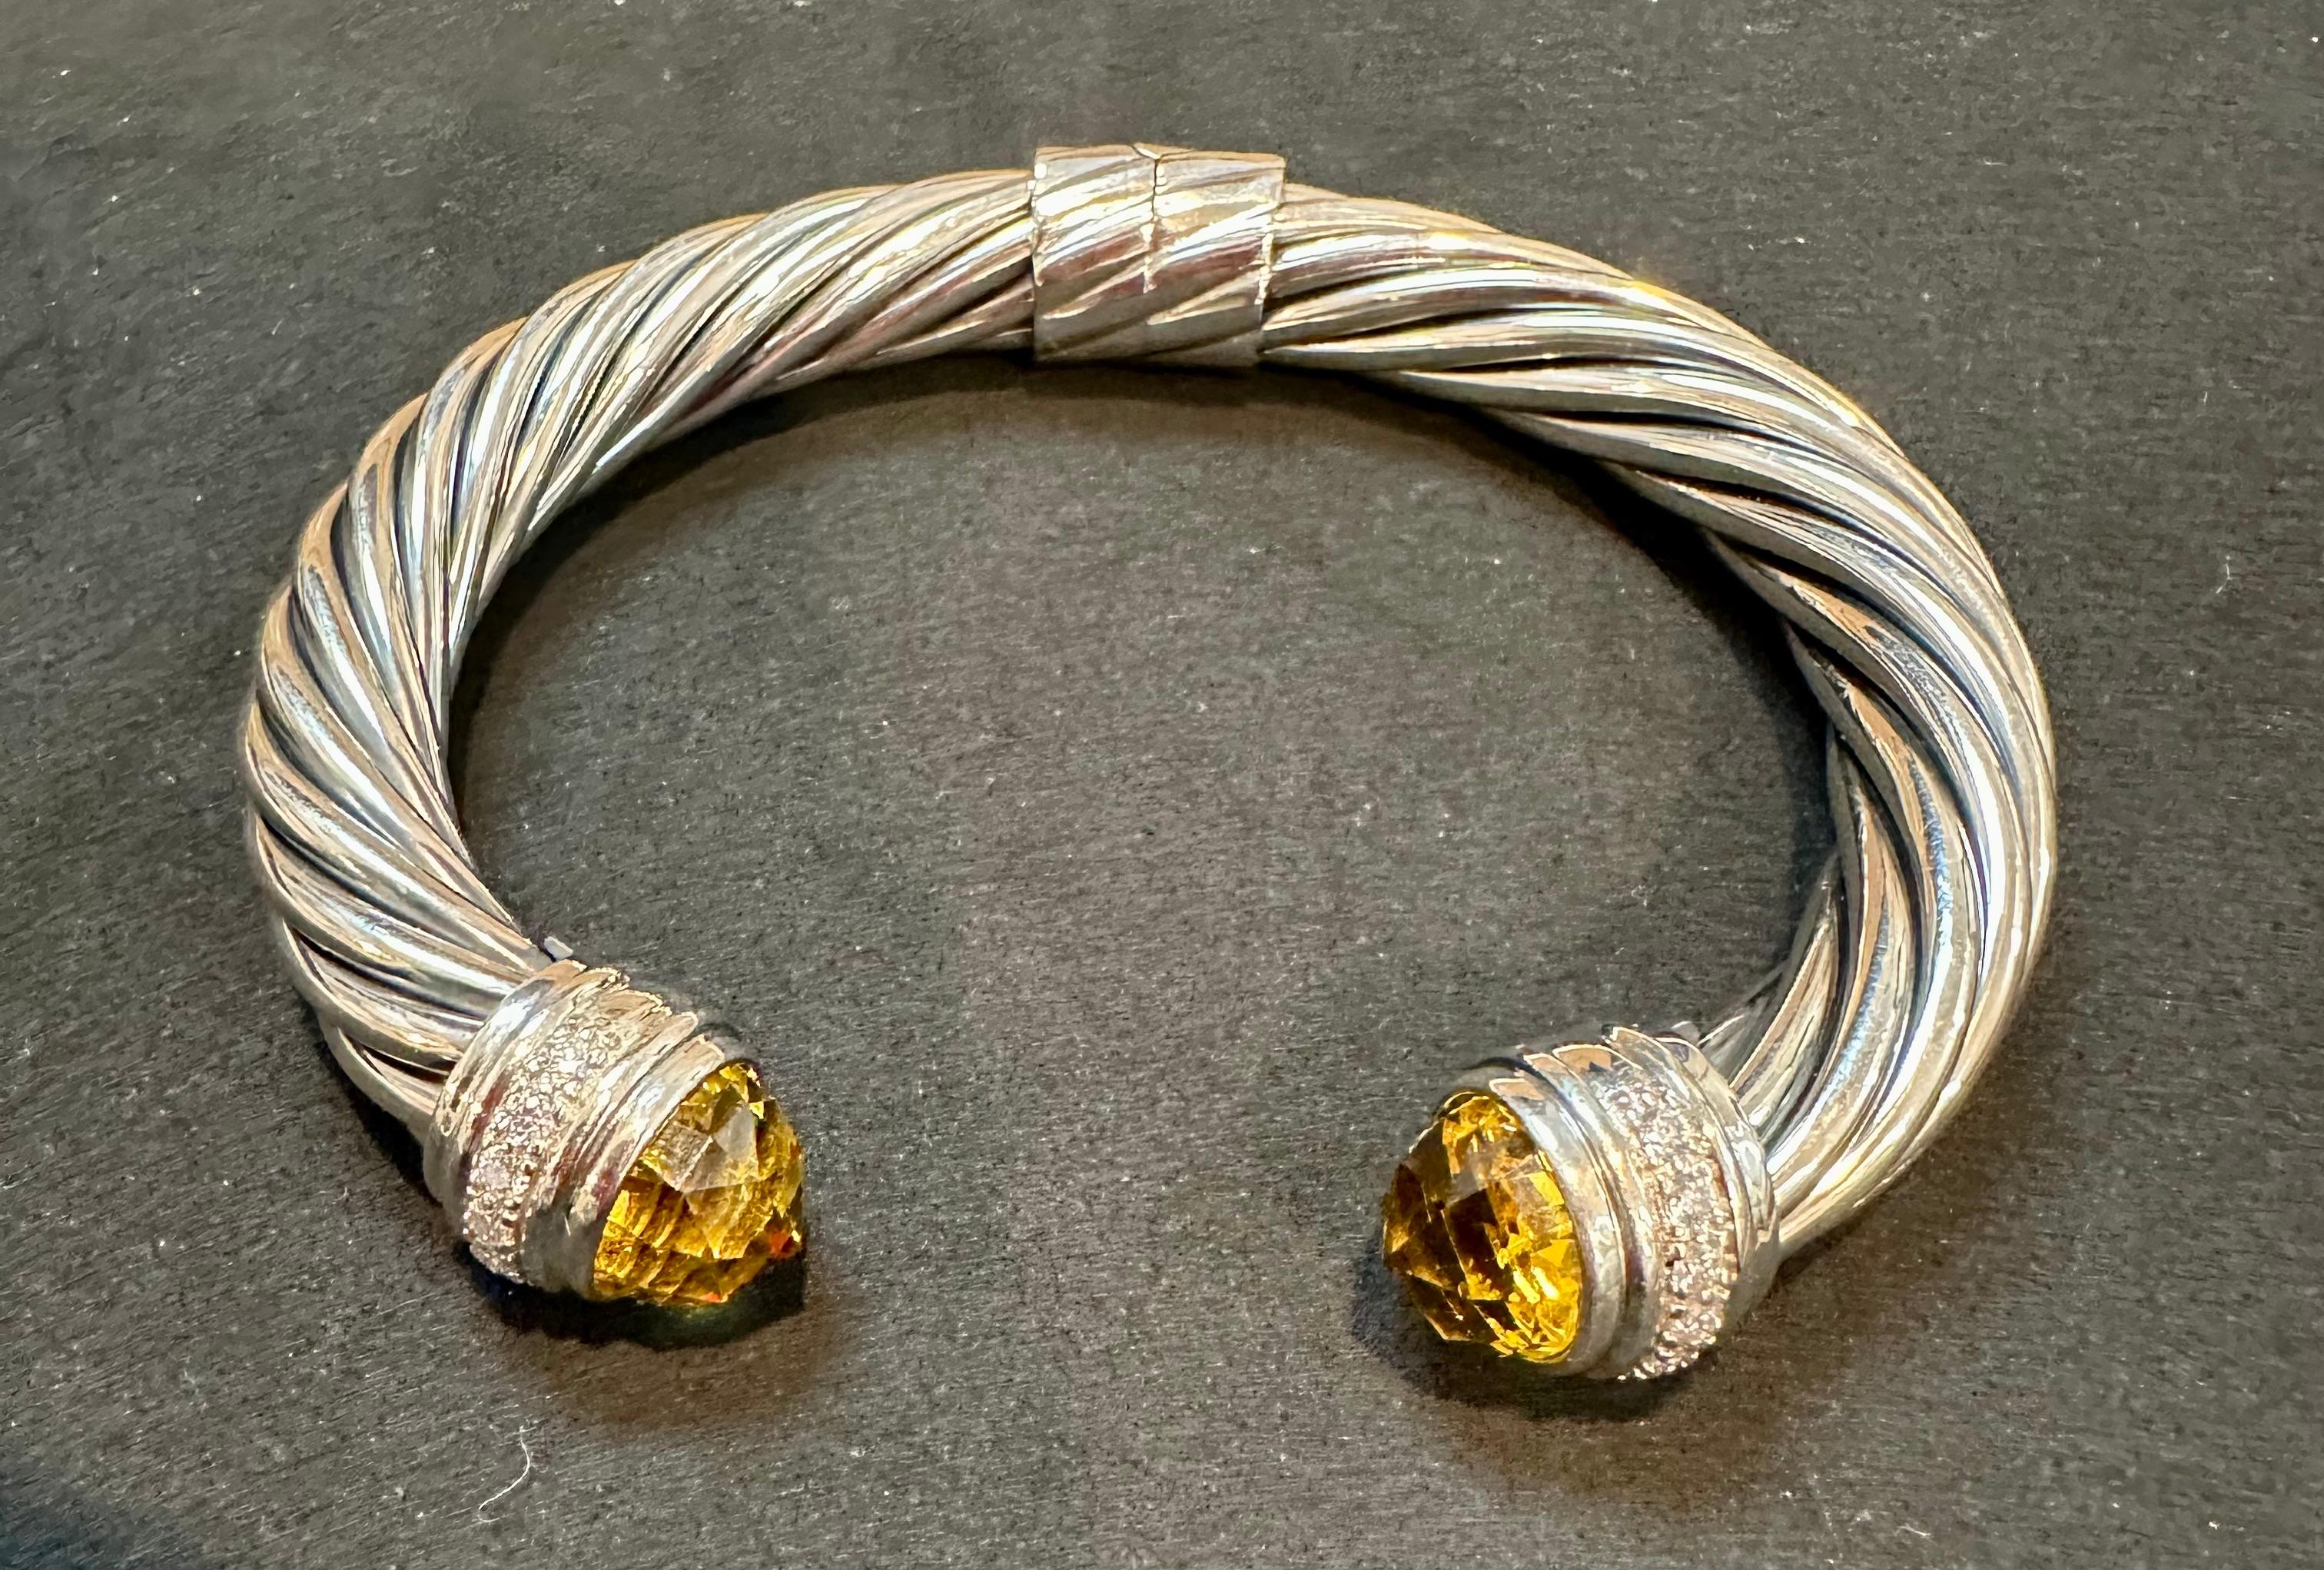 Cabochon DY Cable Classics Bracelet Sterling Silver Citrine & Pave Diamond Hinged Bangle